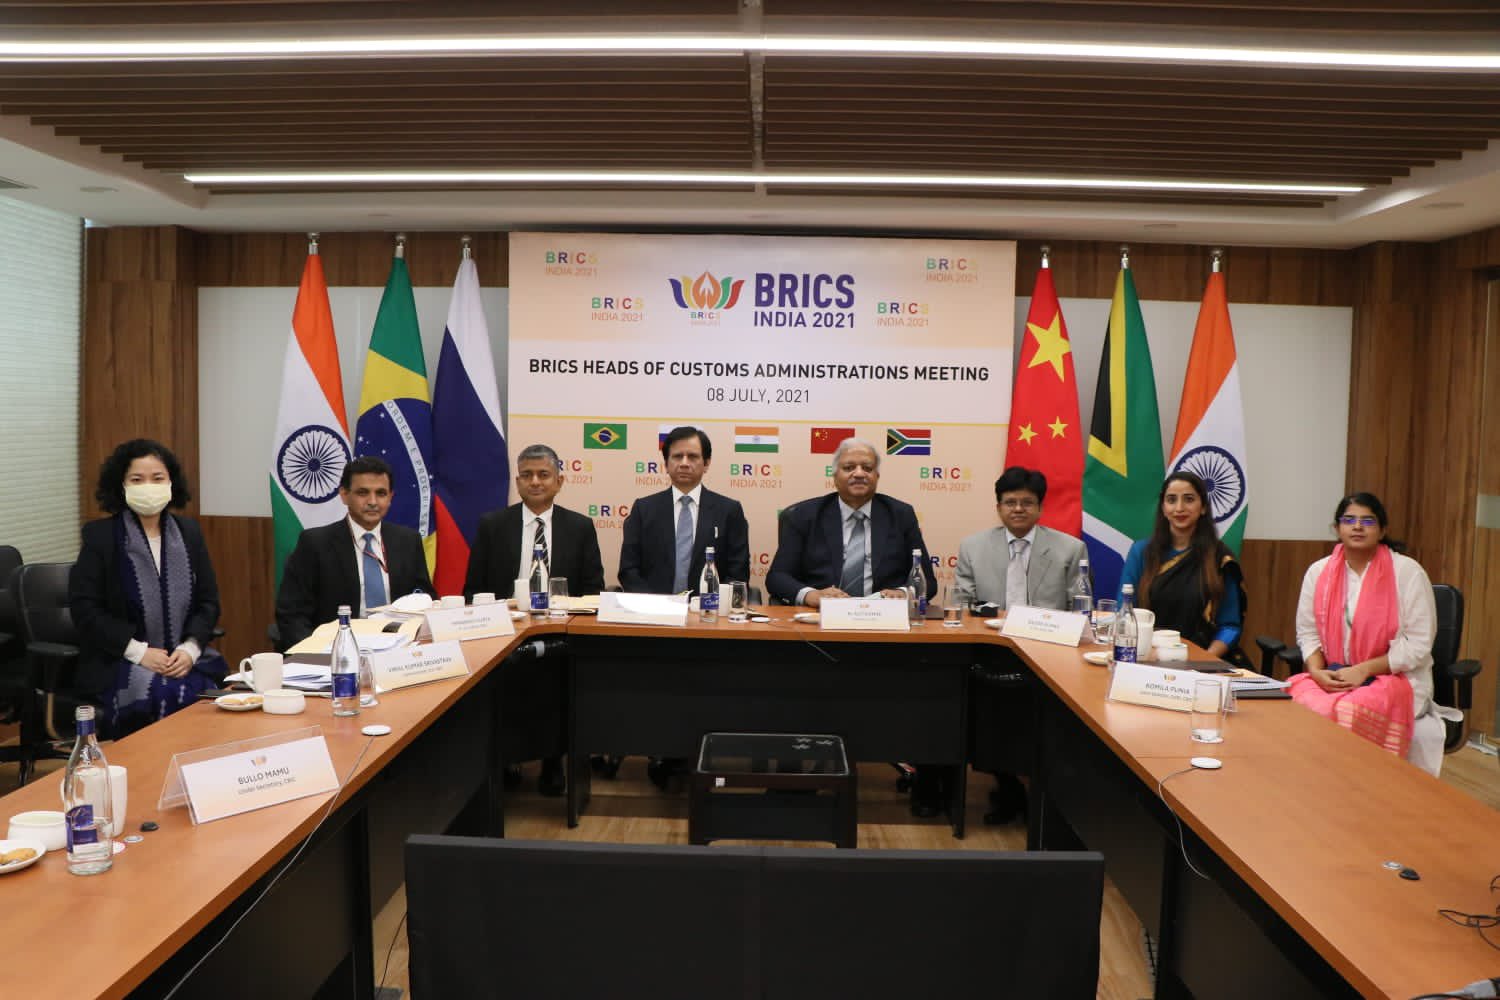 BRICS Customs Administrators deliberated on key deliverables for 2021 such as Agreement for Cooperation on Mutual Administrative Assistance capacity building and exchange of pre-arrival Customs data.